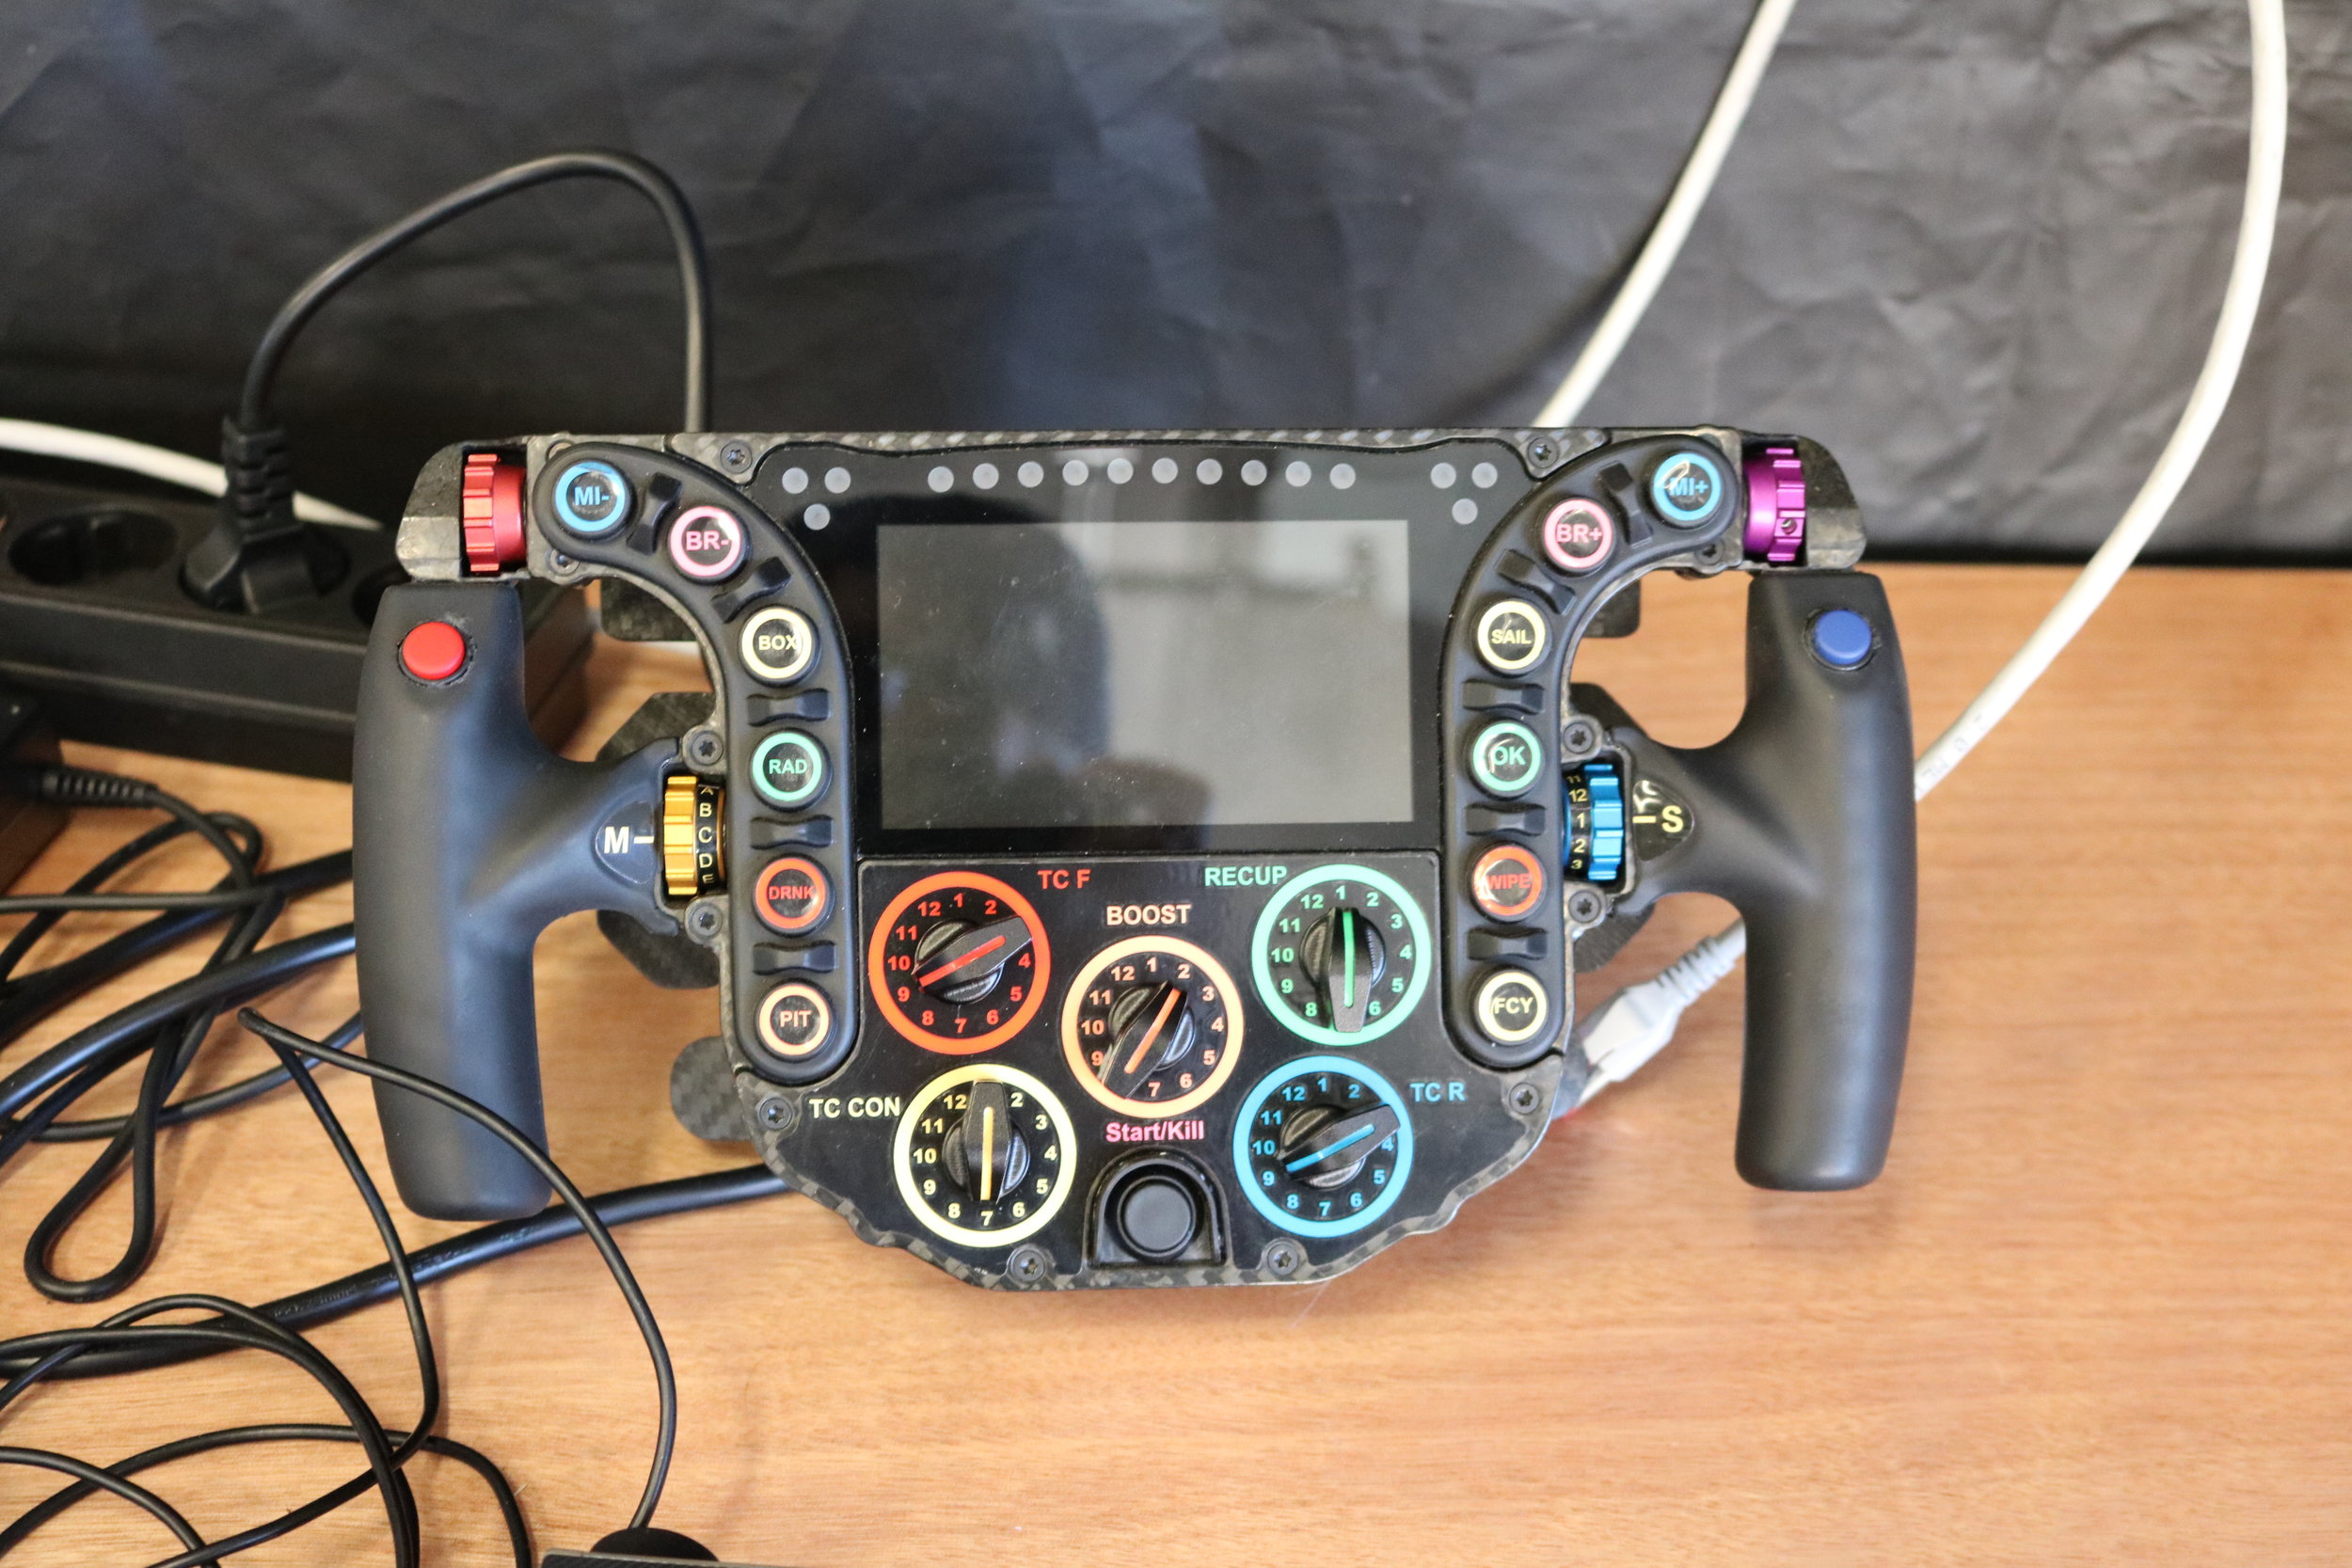 Mostly dials and buttons